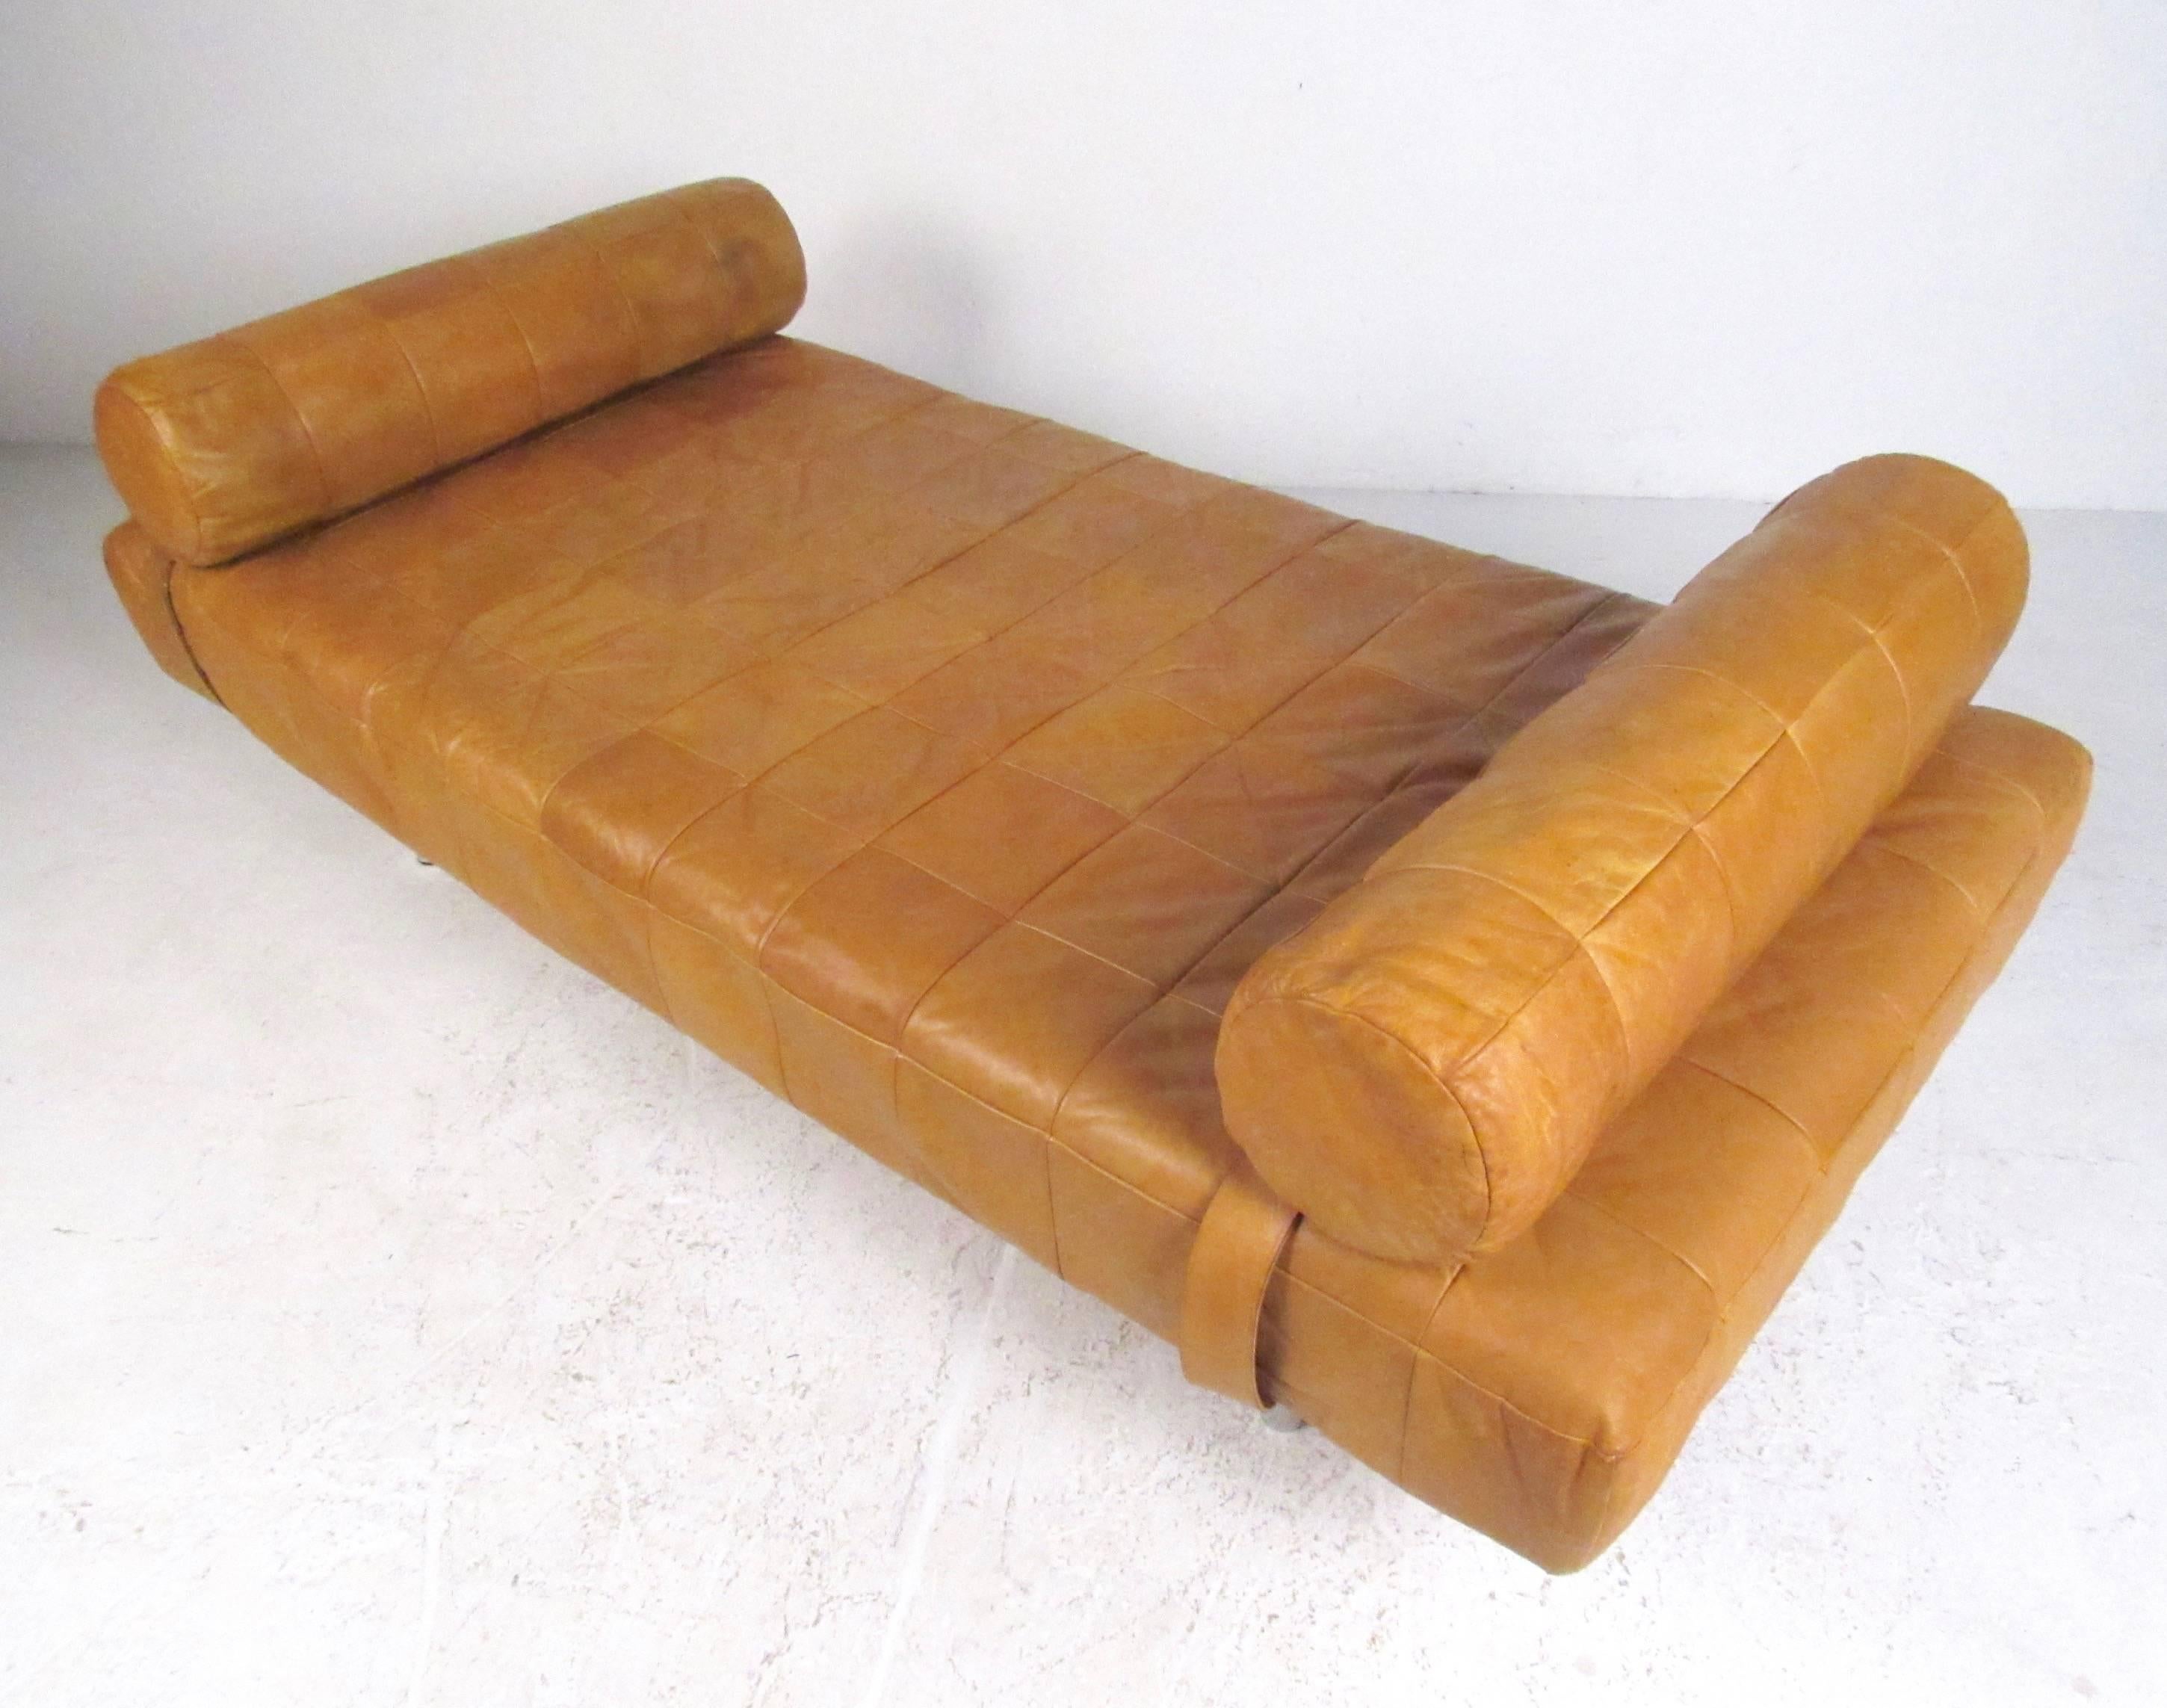 This stylish vintage leather daybed by Stendig features patchwork upholstery and two matching bolsters. Tubular chrome legs add to the Mid-Century Modern appeal of this comfortable and impressive daybed, perfect addition to home or office. Please